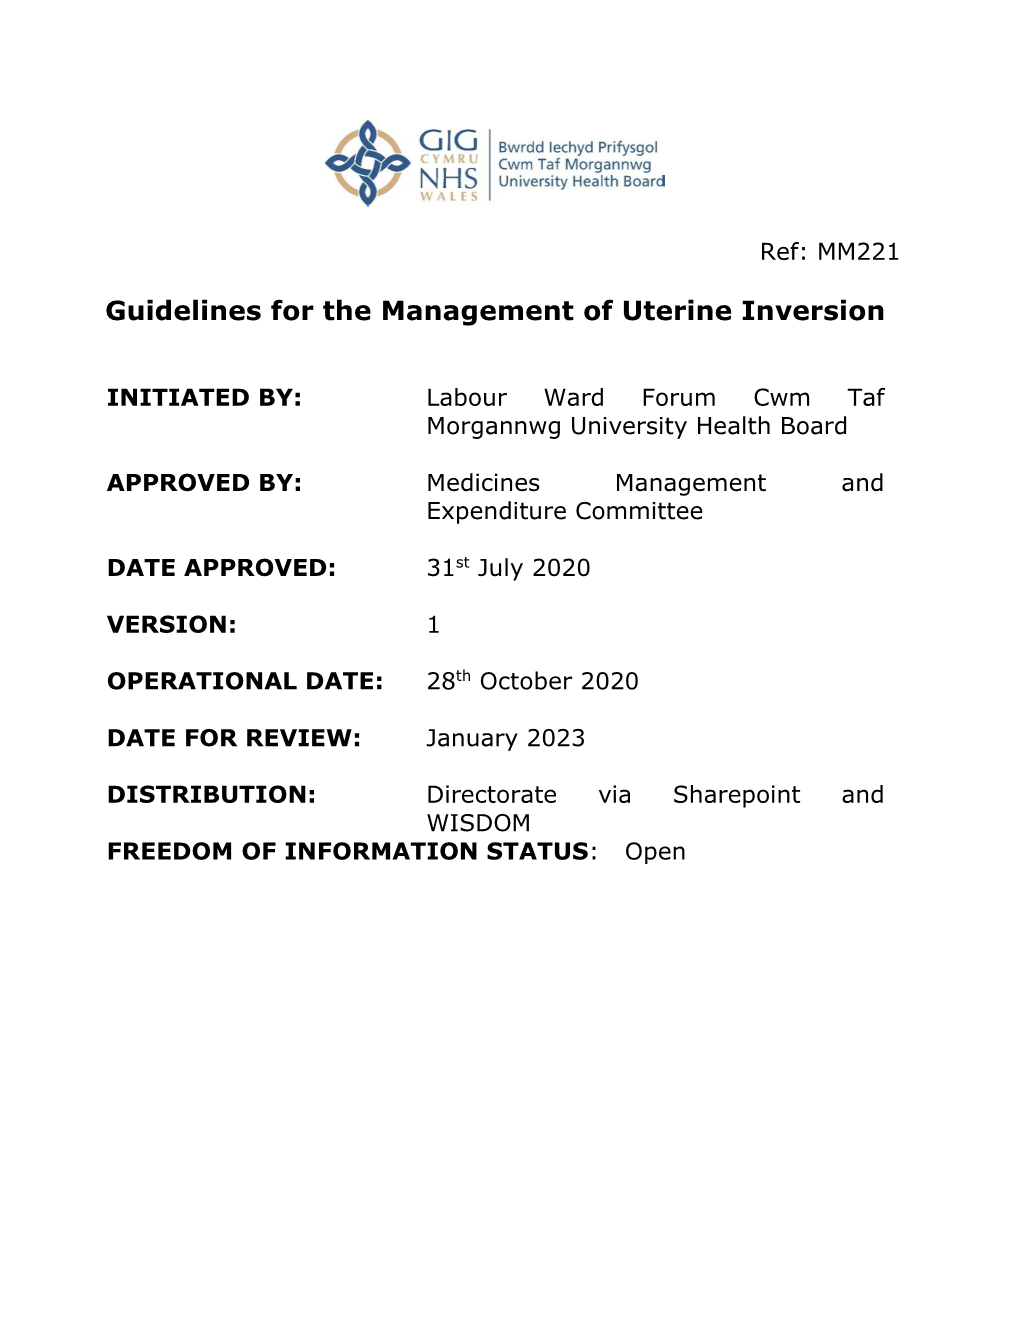 Guidelines for the Management of Uterine Inversion